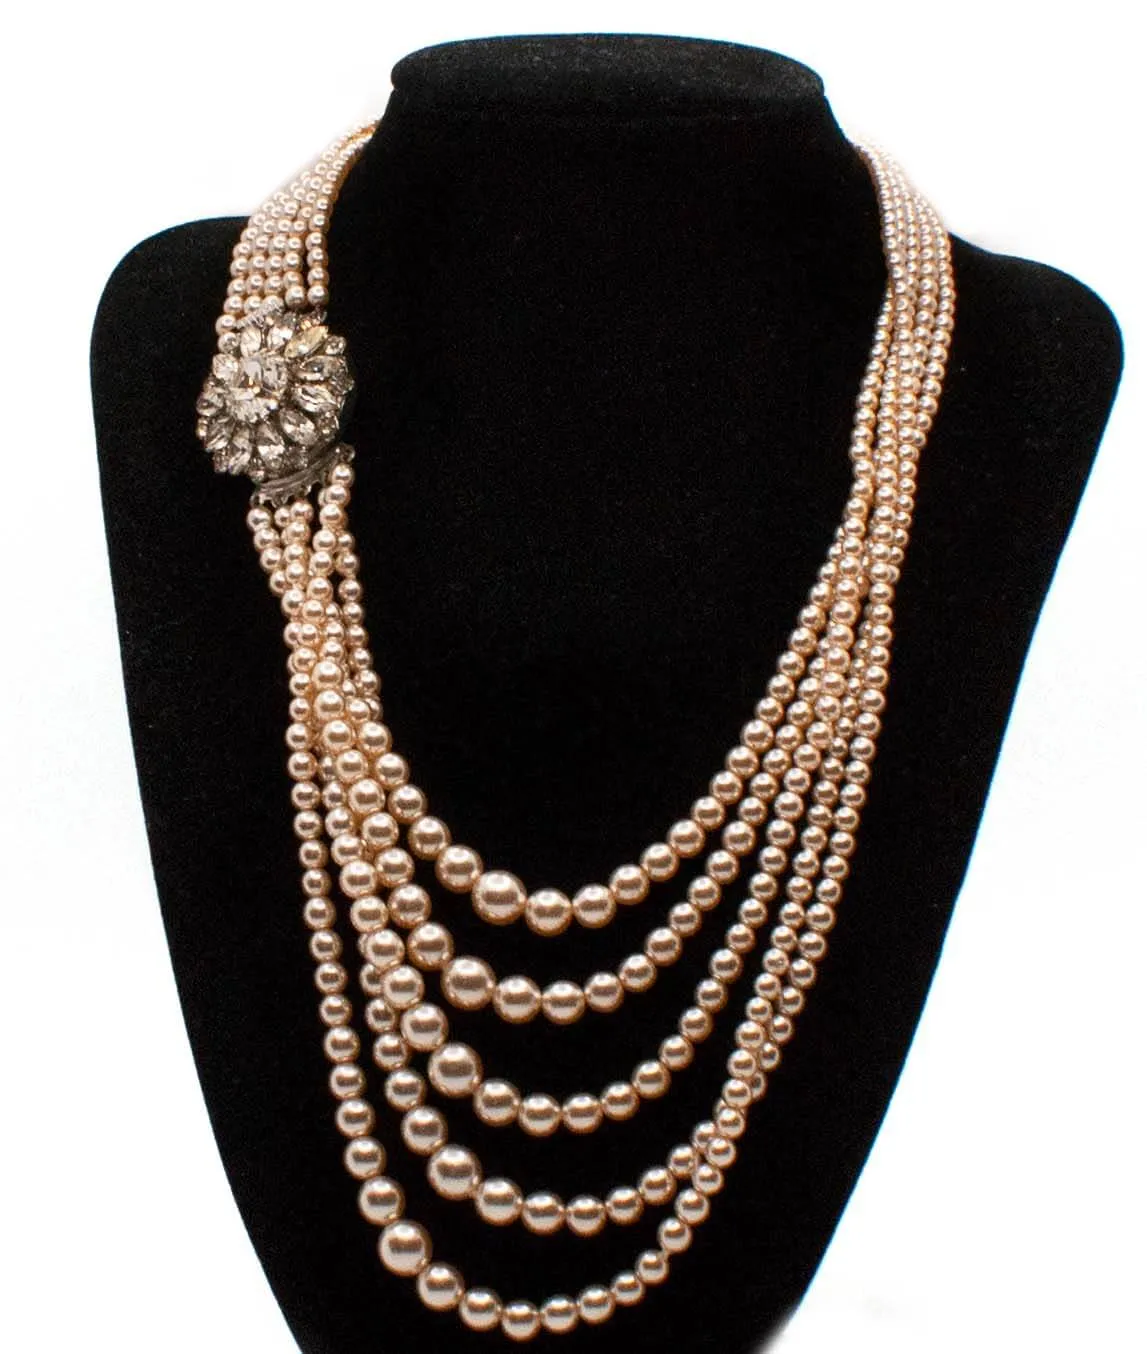 Vintage multi-strand faux pearl champagne coloured necklace with decorative clasp on a stand